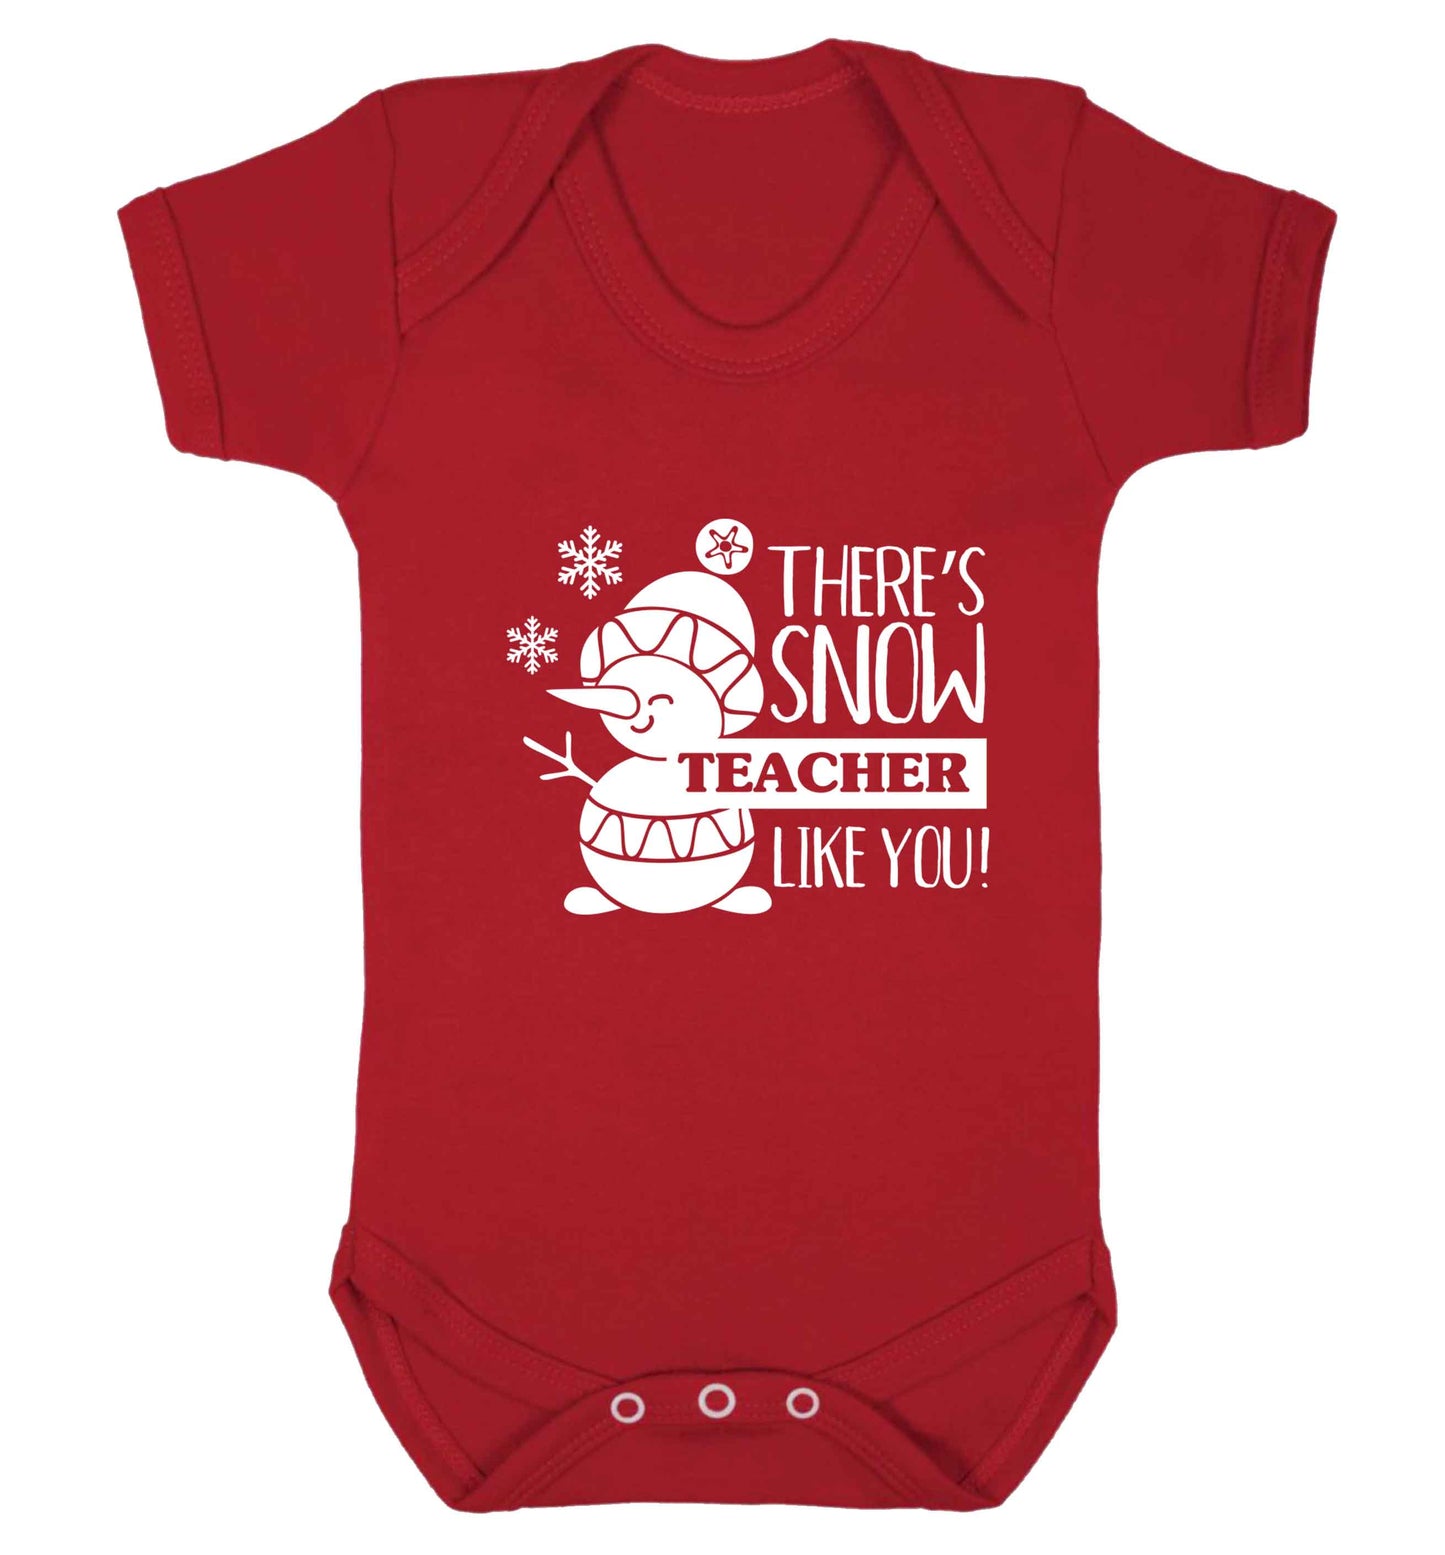 There's snow teacher like you baby vest red 18-24 months